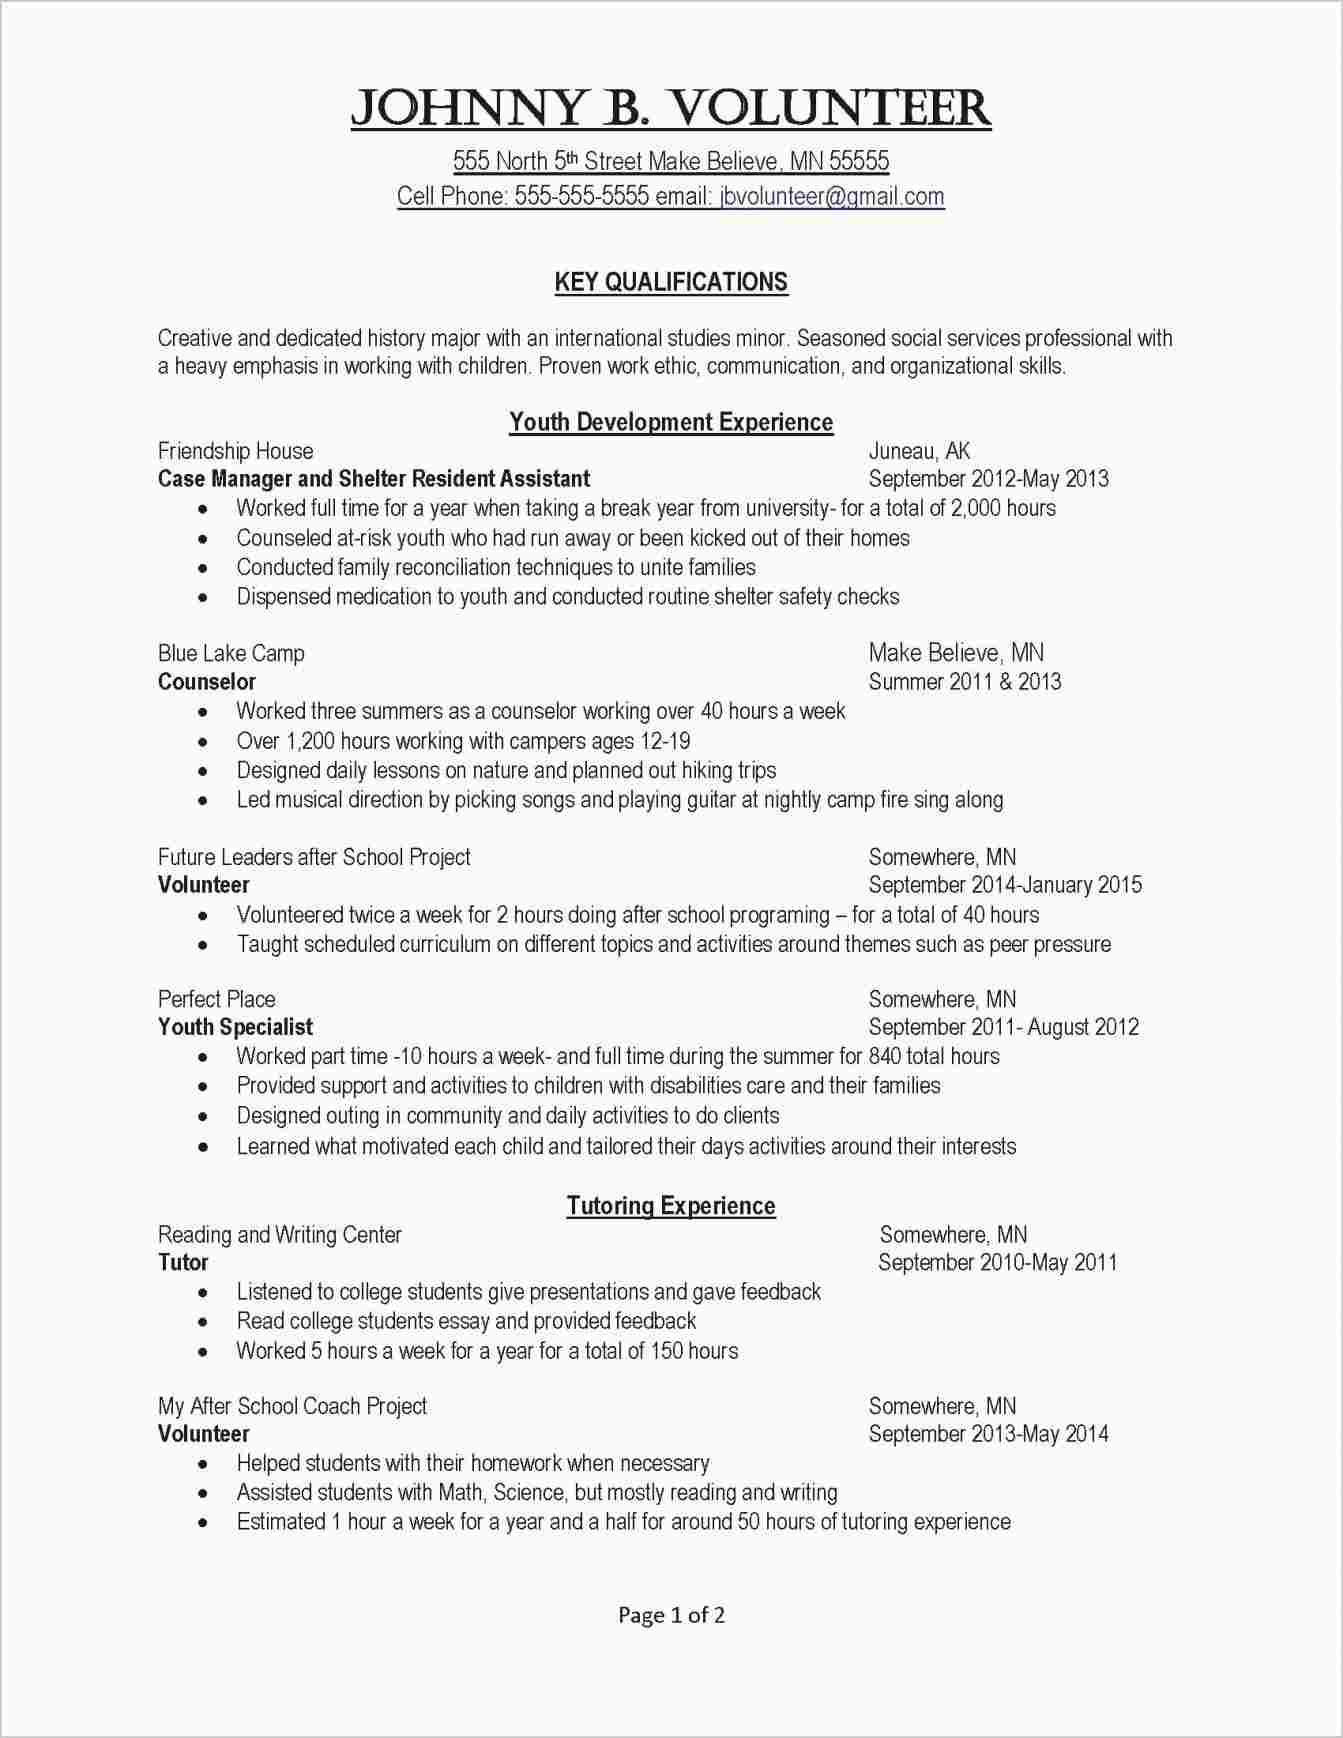 Resume Template for 18 Year Old 16 Year Old Job Resume – Arxiusarquitectura